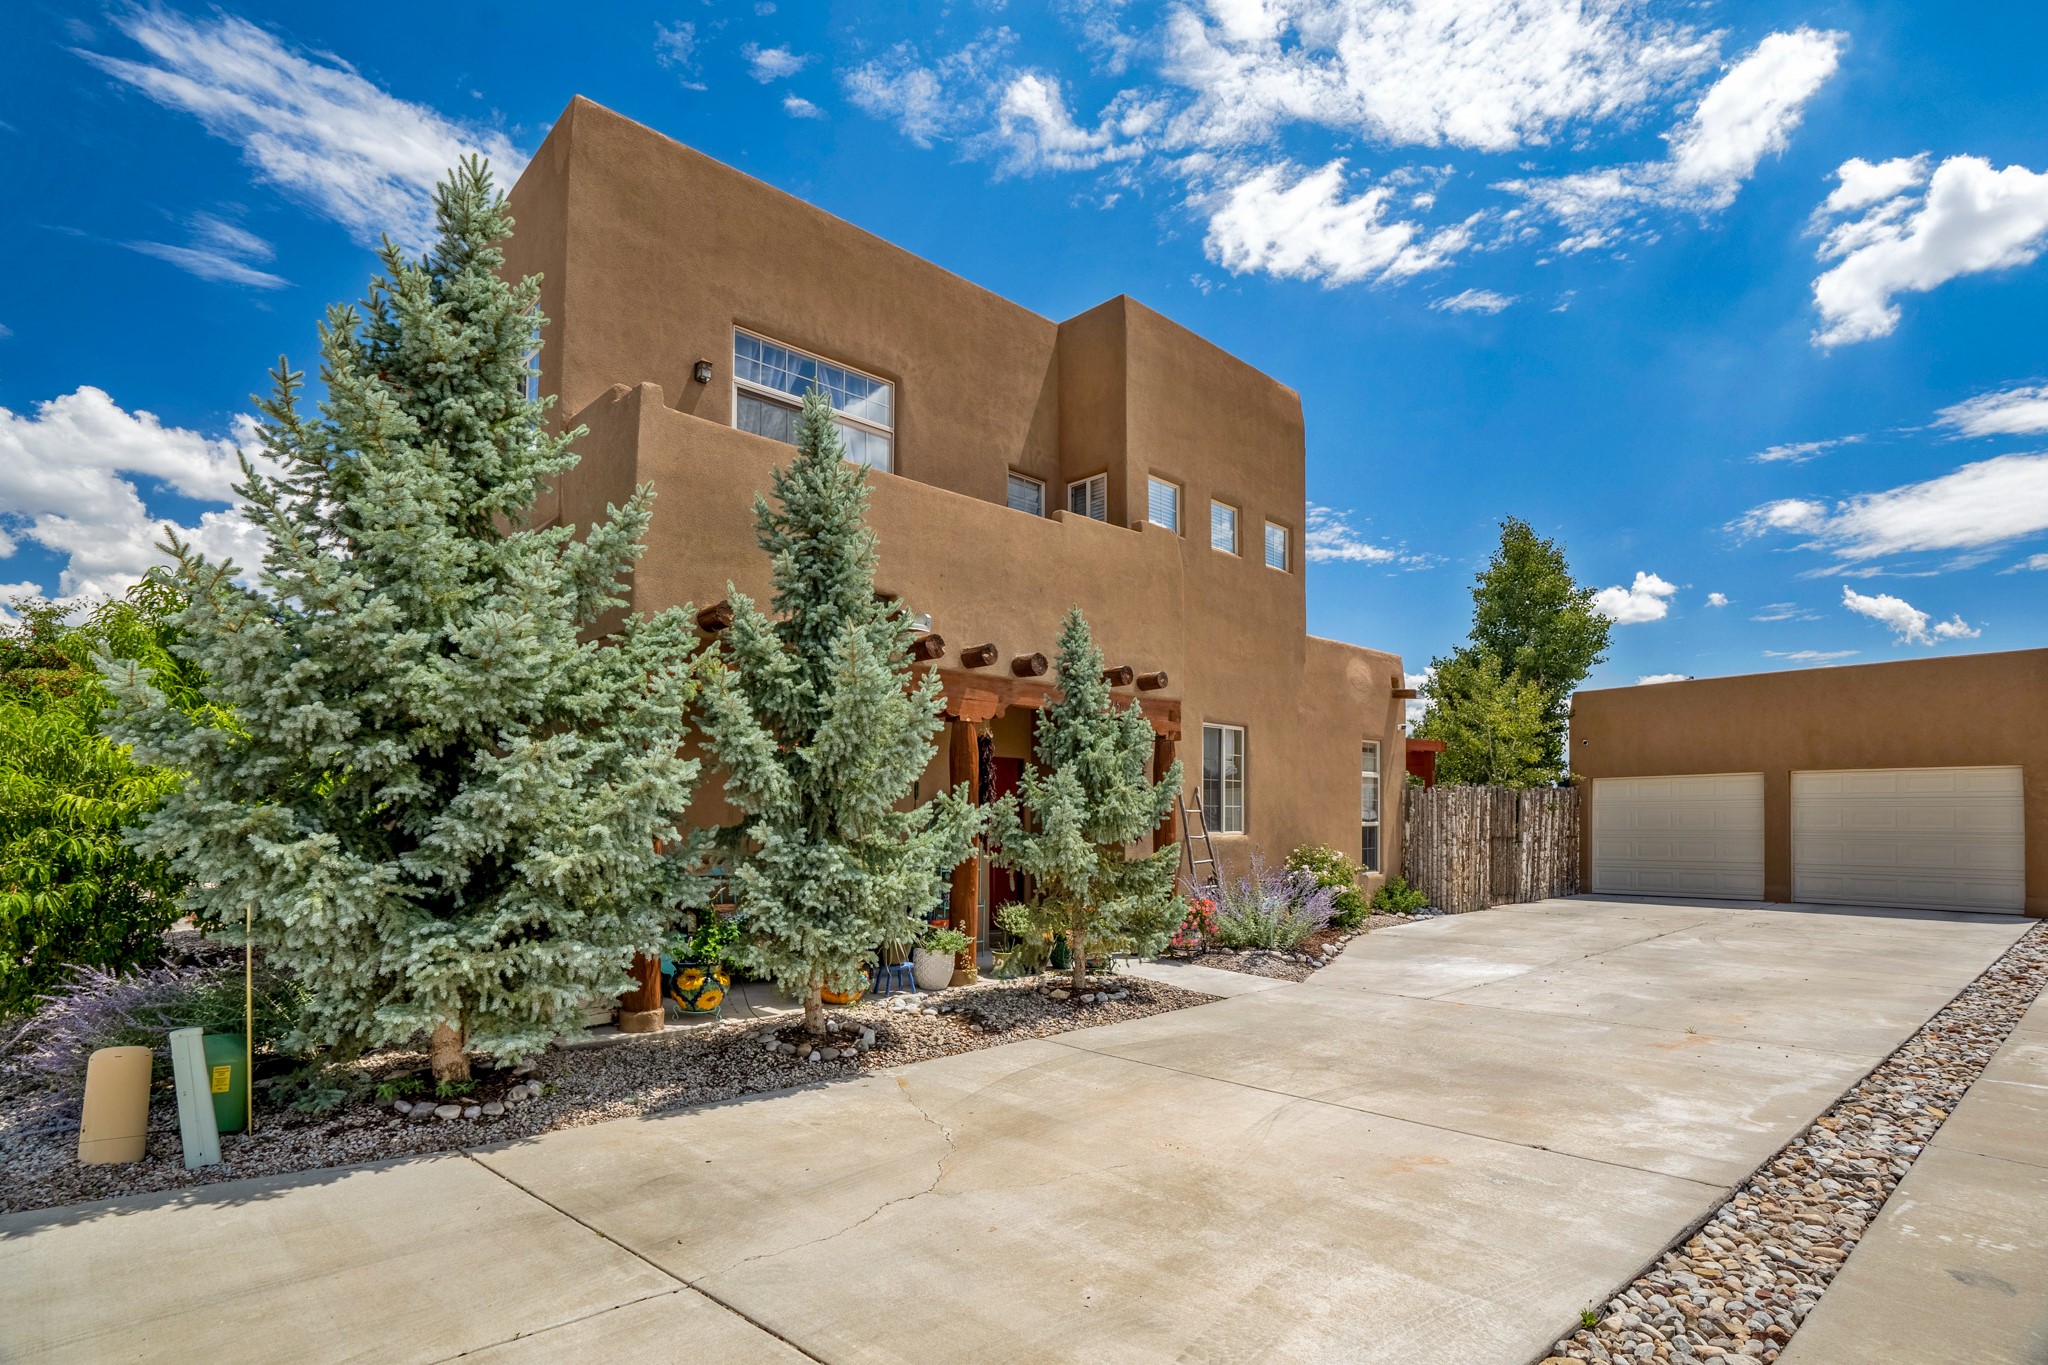 4250 River Song, Santa Fe, New Mexico 87507, 3 Bedrooms Bedrooms, ,2 BathroomsBathrooms,Residential,For Sale,4250 River Song,202232665